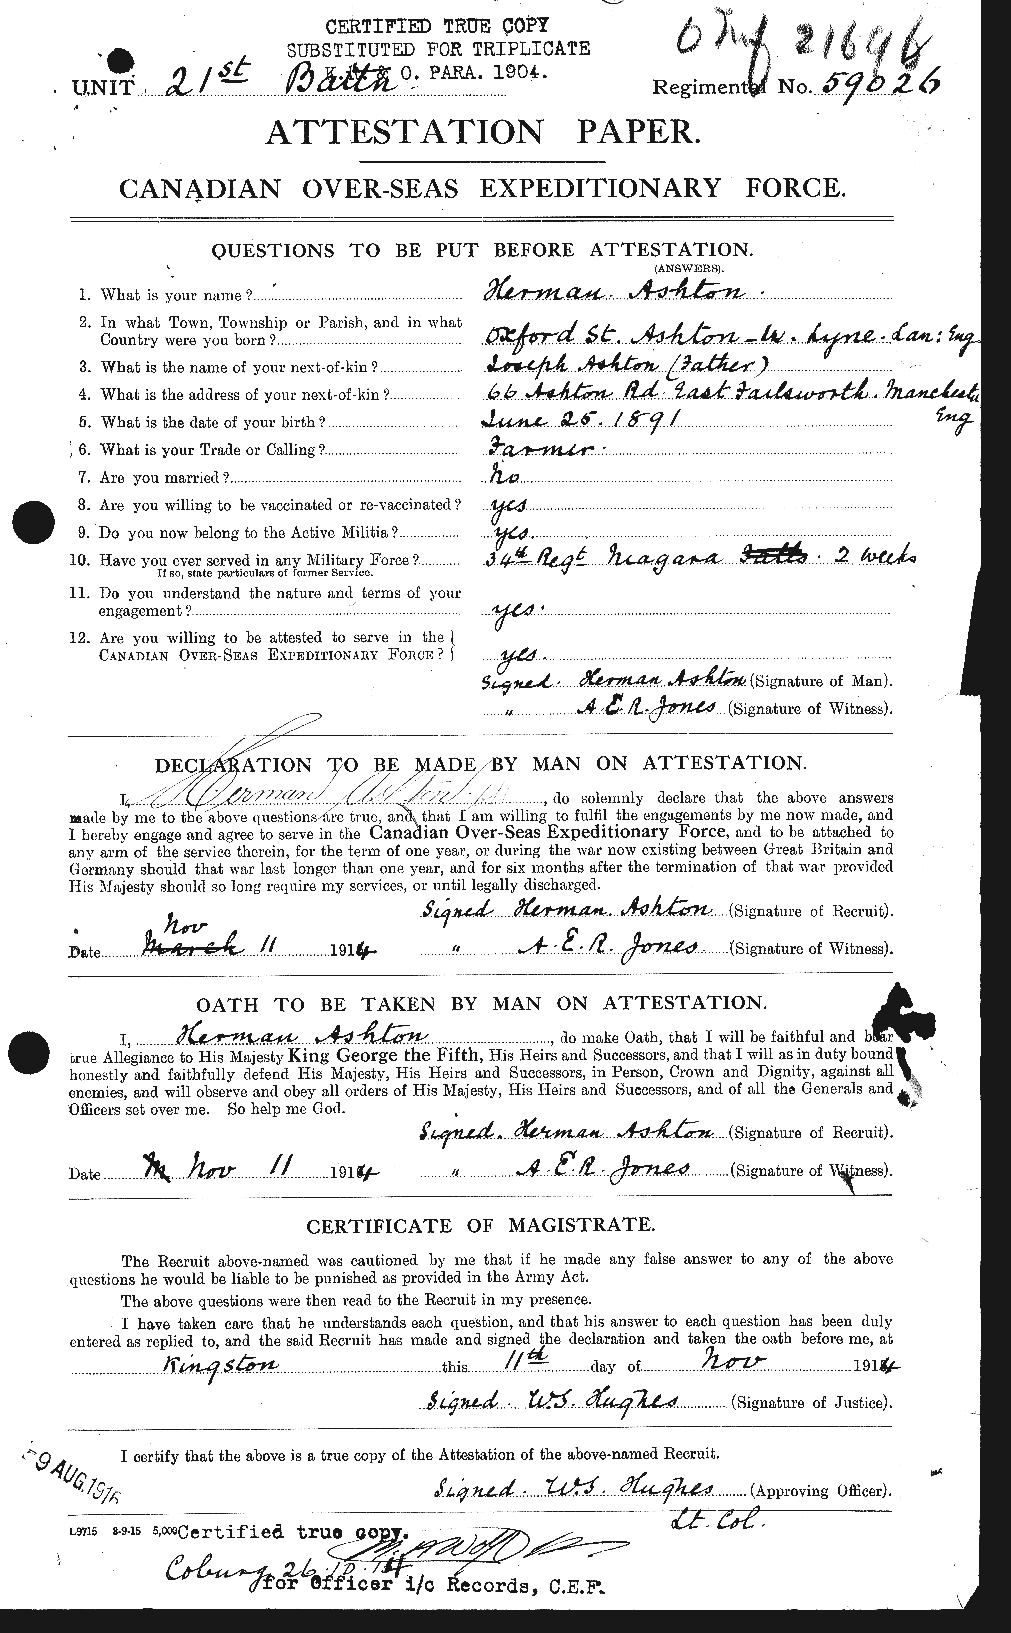 Personnel Records of the First World War - CEF 223845a